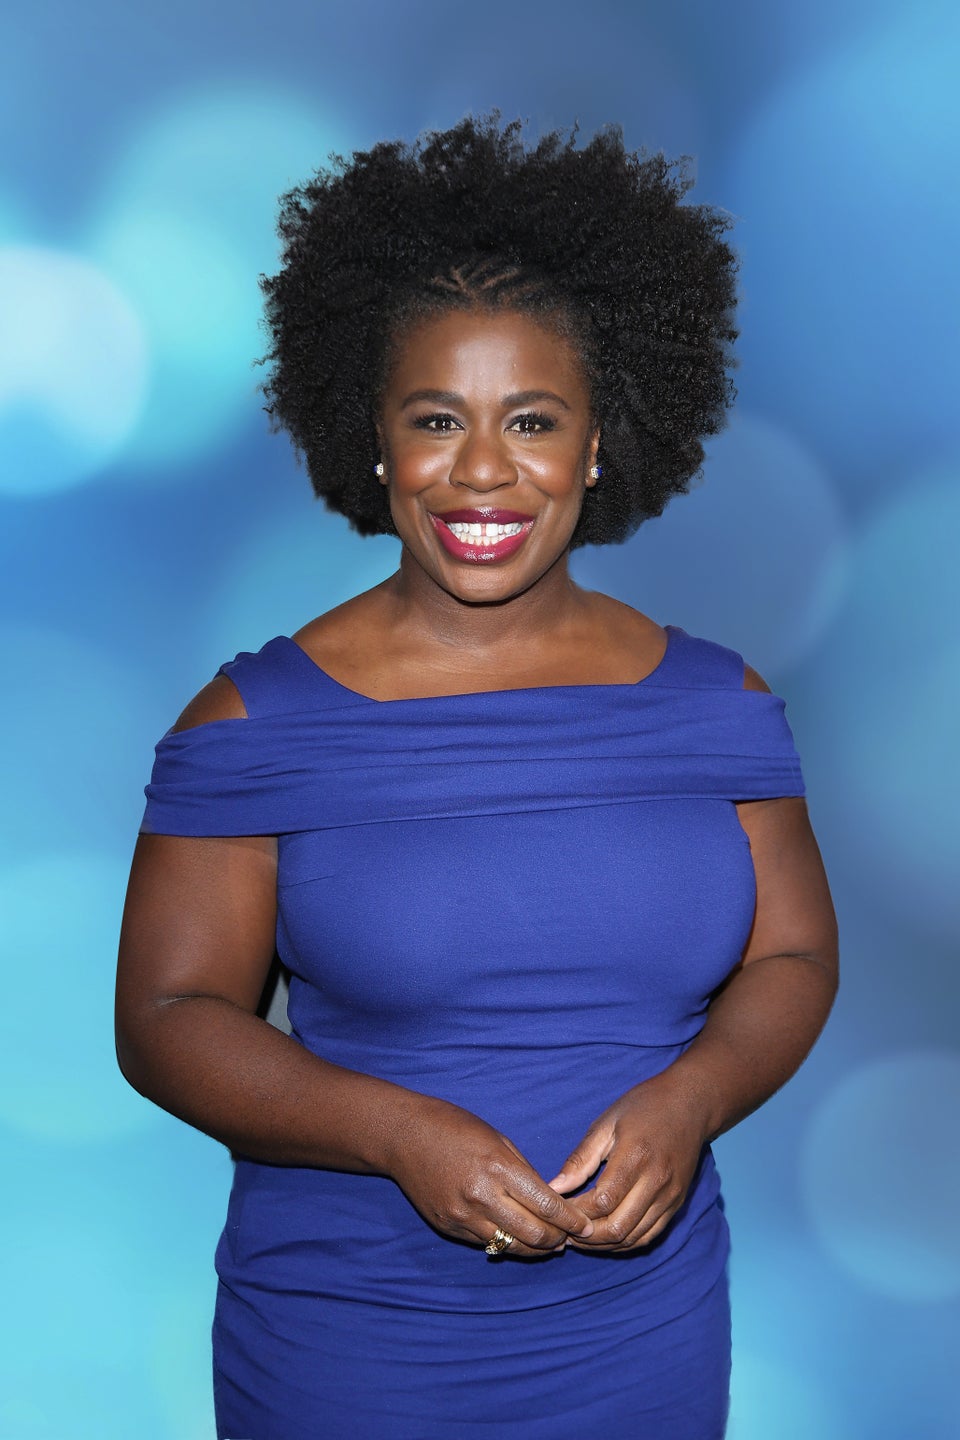 You Have To See Uzo Aduba’s Glorious ‘Team Blue’ Afro